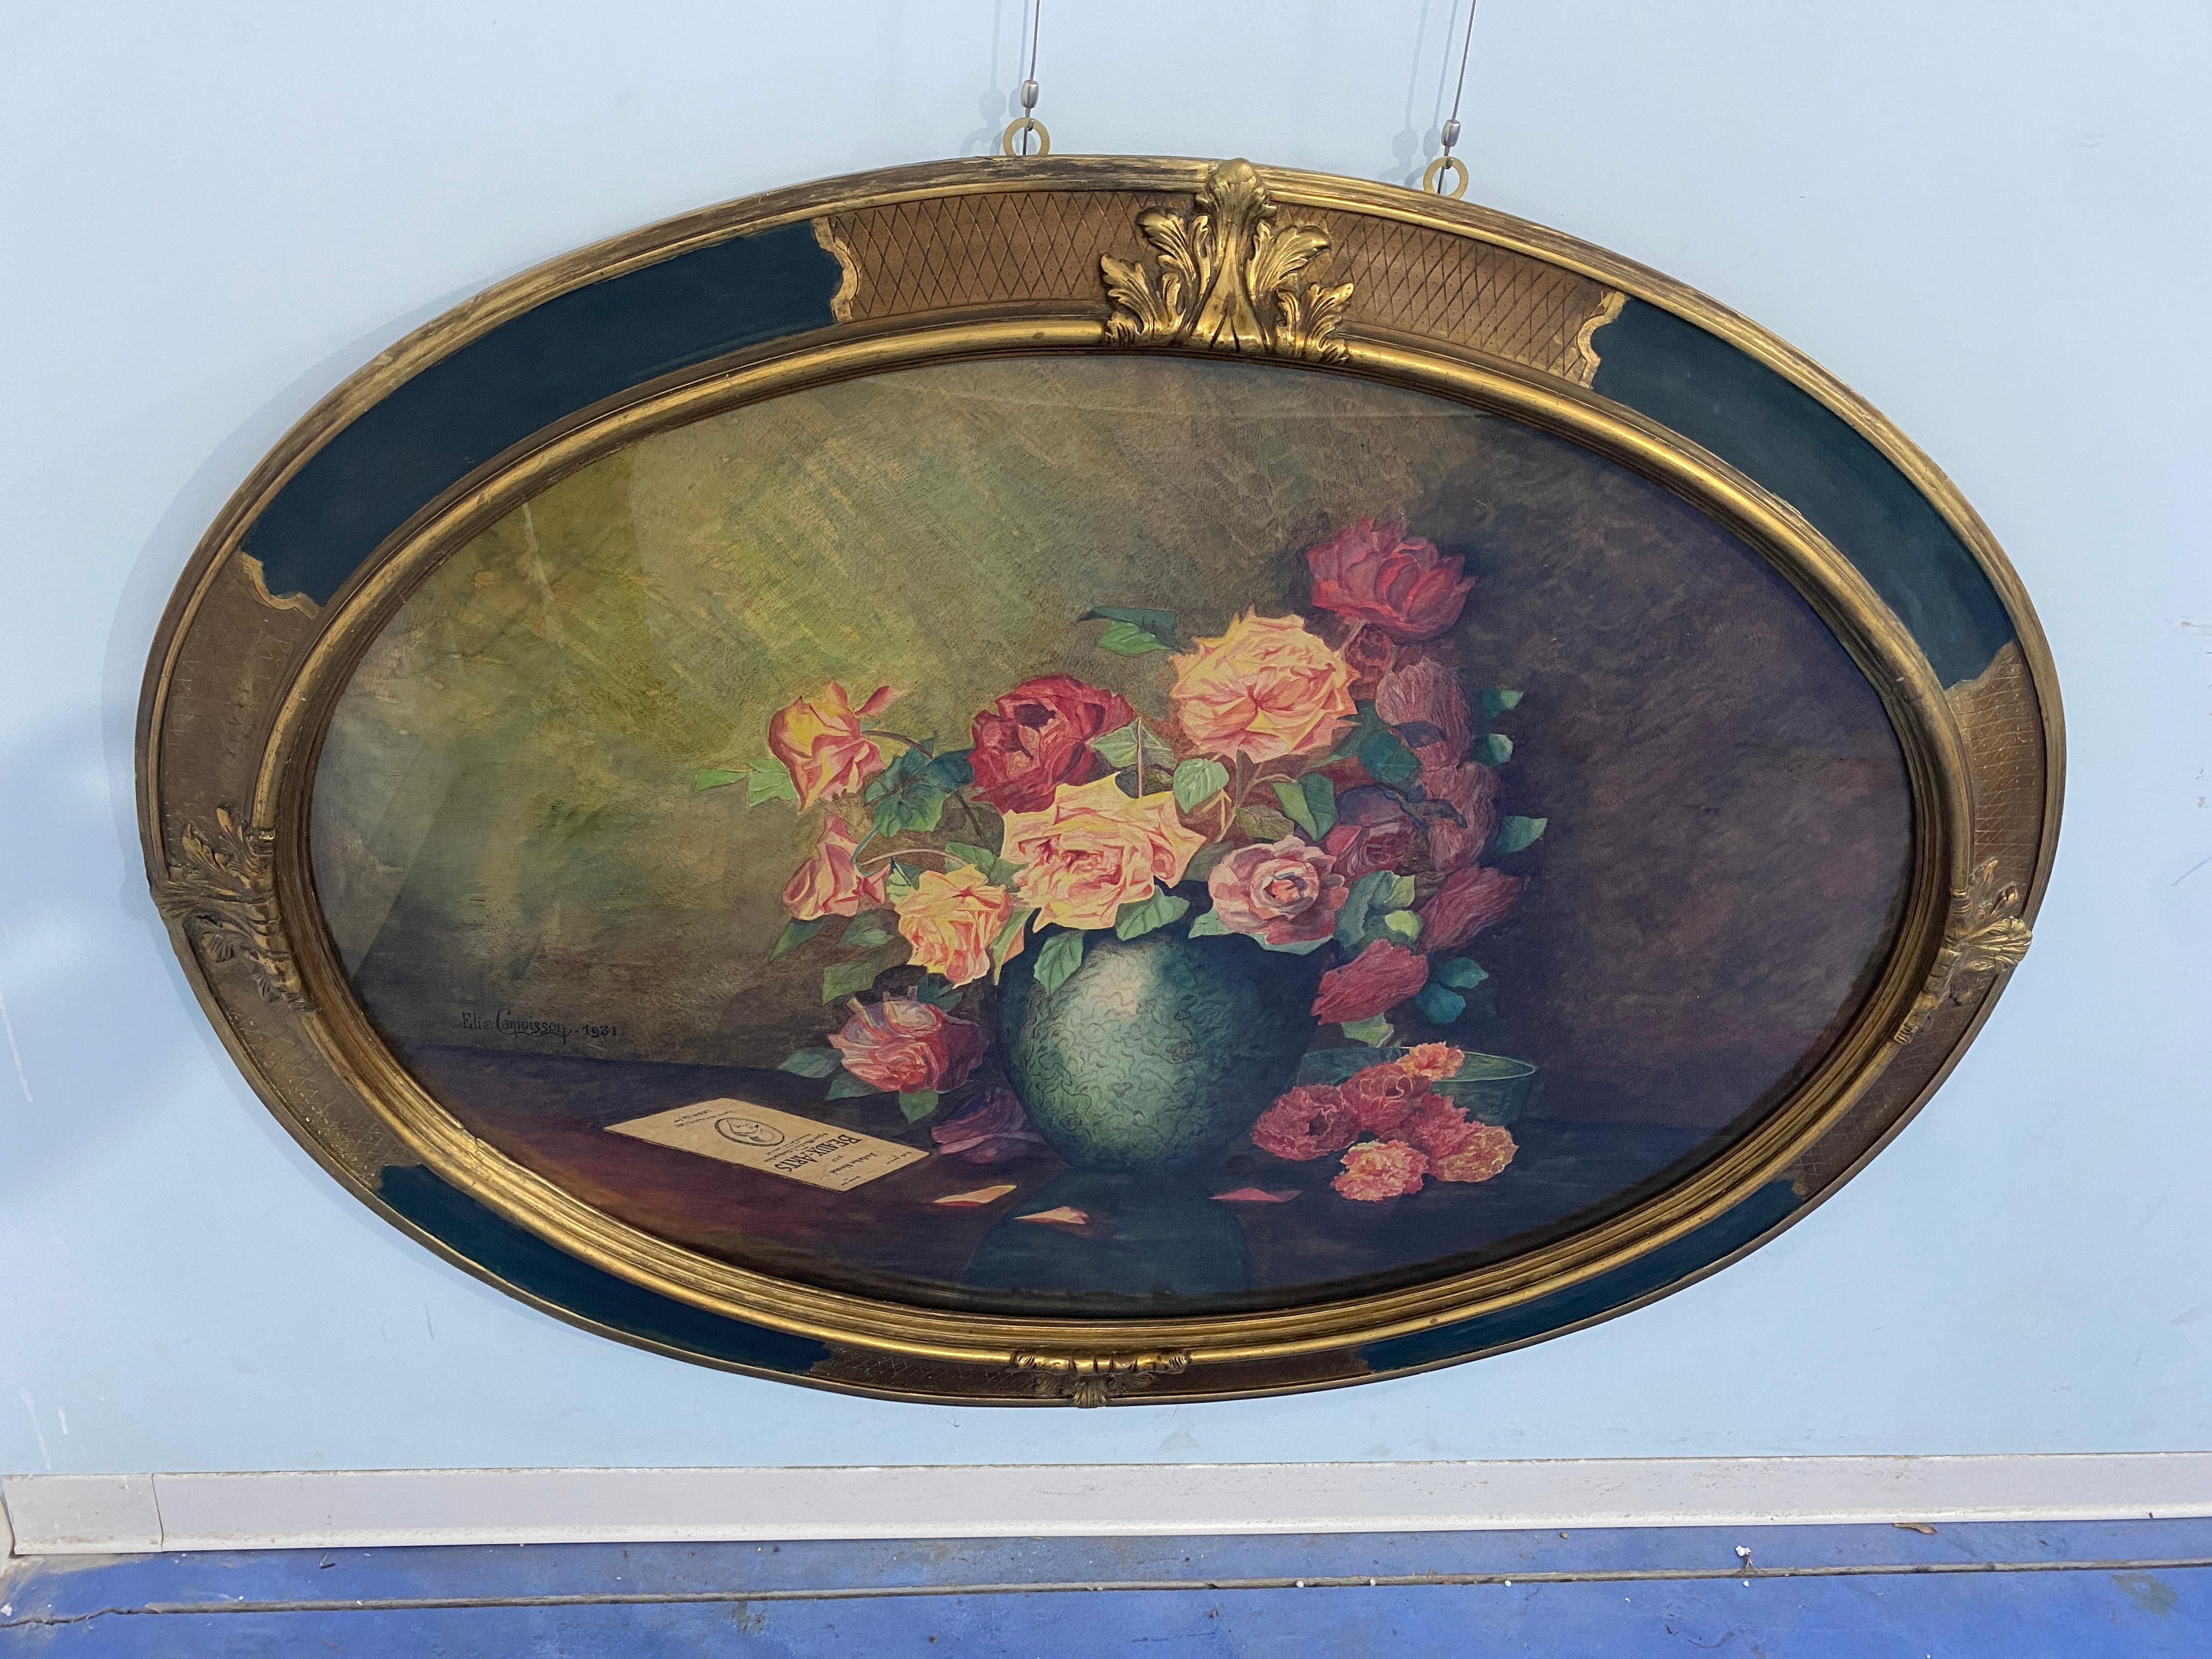 Refined watercolor painting executed by Elie Camoisson in 1931.The author belonging to the Société Lyonnais des Beaux-Arts,demonstrates in this work a truly unique and original style in depicting roses by combining them with a skillful use of